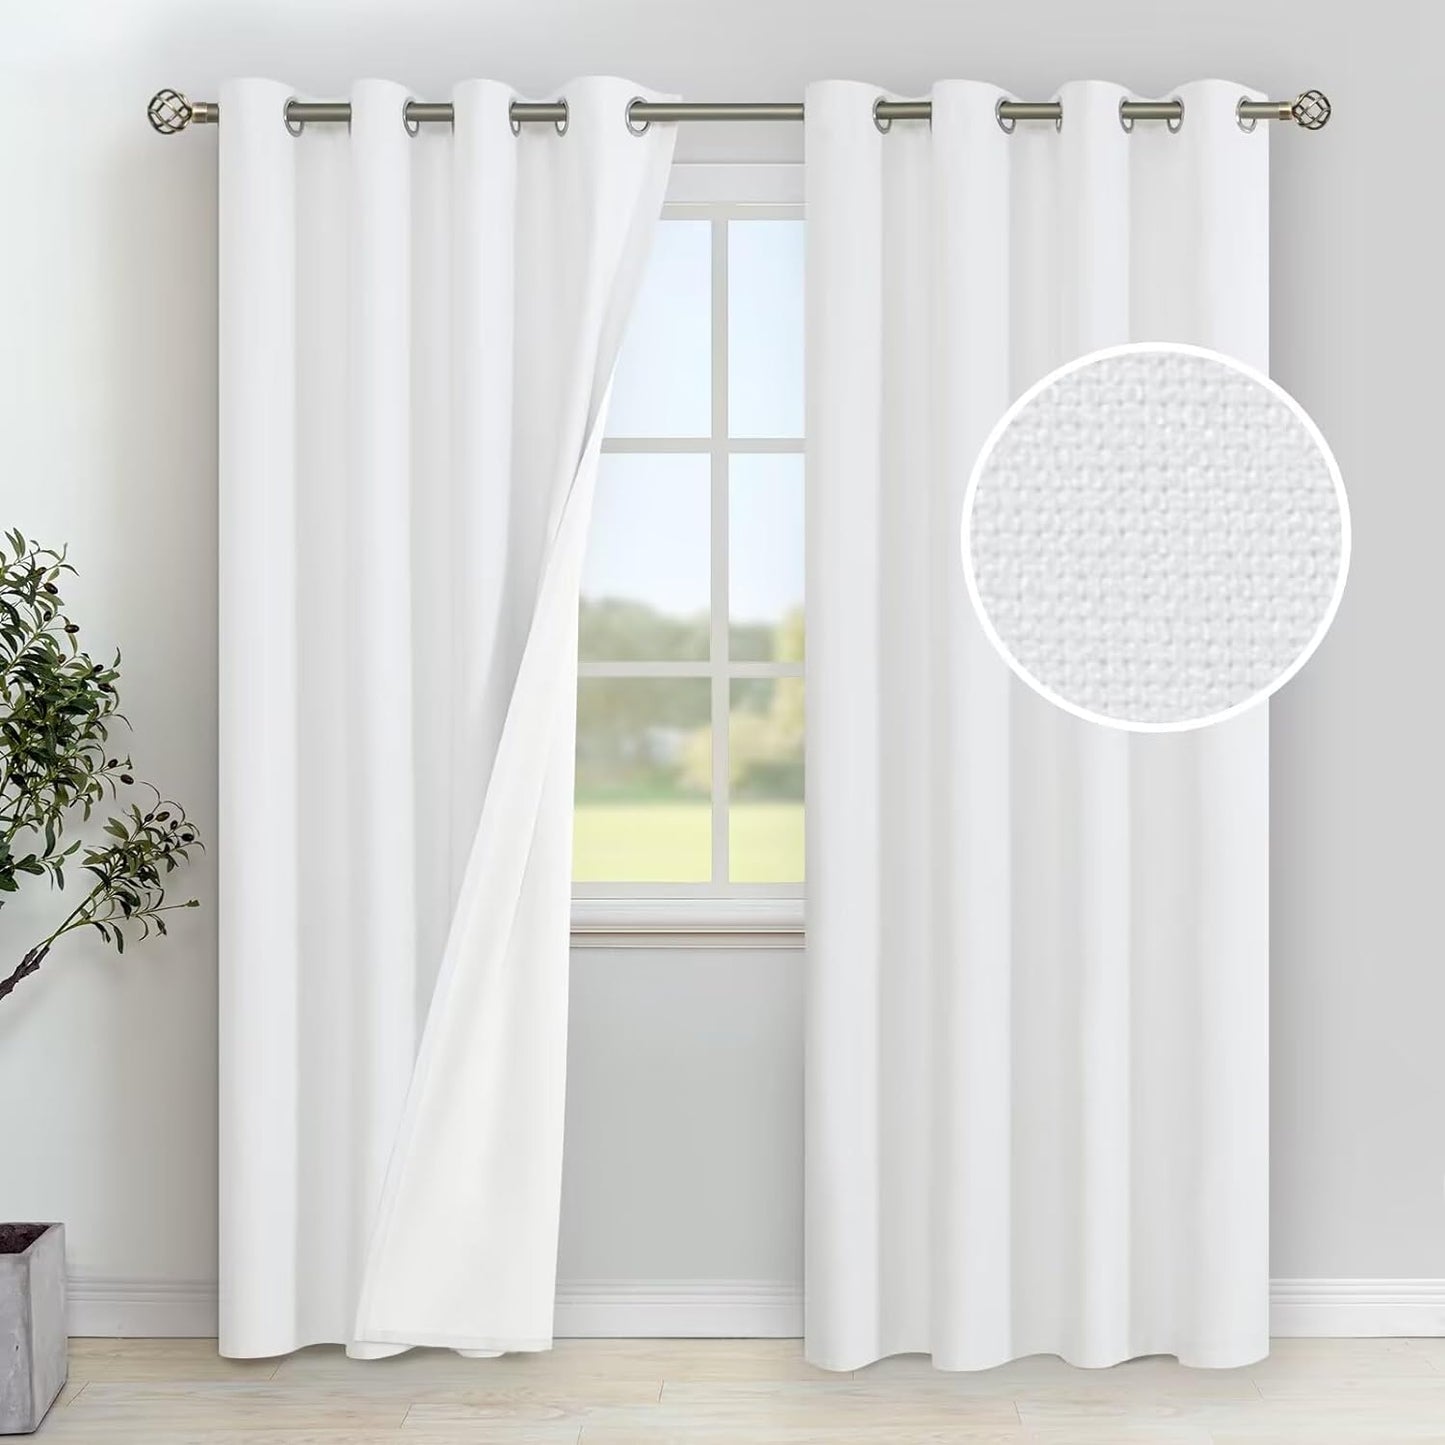 Youngstex Linen Blackout Curtains 63 Inches Long, Grommet Full Room Darkening Linen Window Drapes Thermal Insulated for Living Room Bedroom, 2 Panels, 52 X 63 Inch, Linen  YoungsTex White 52W X 84L 